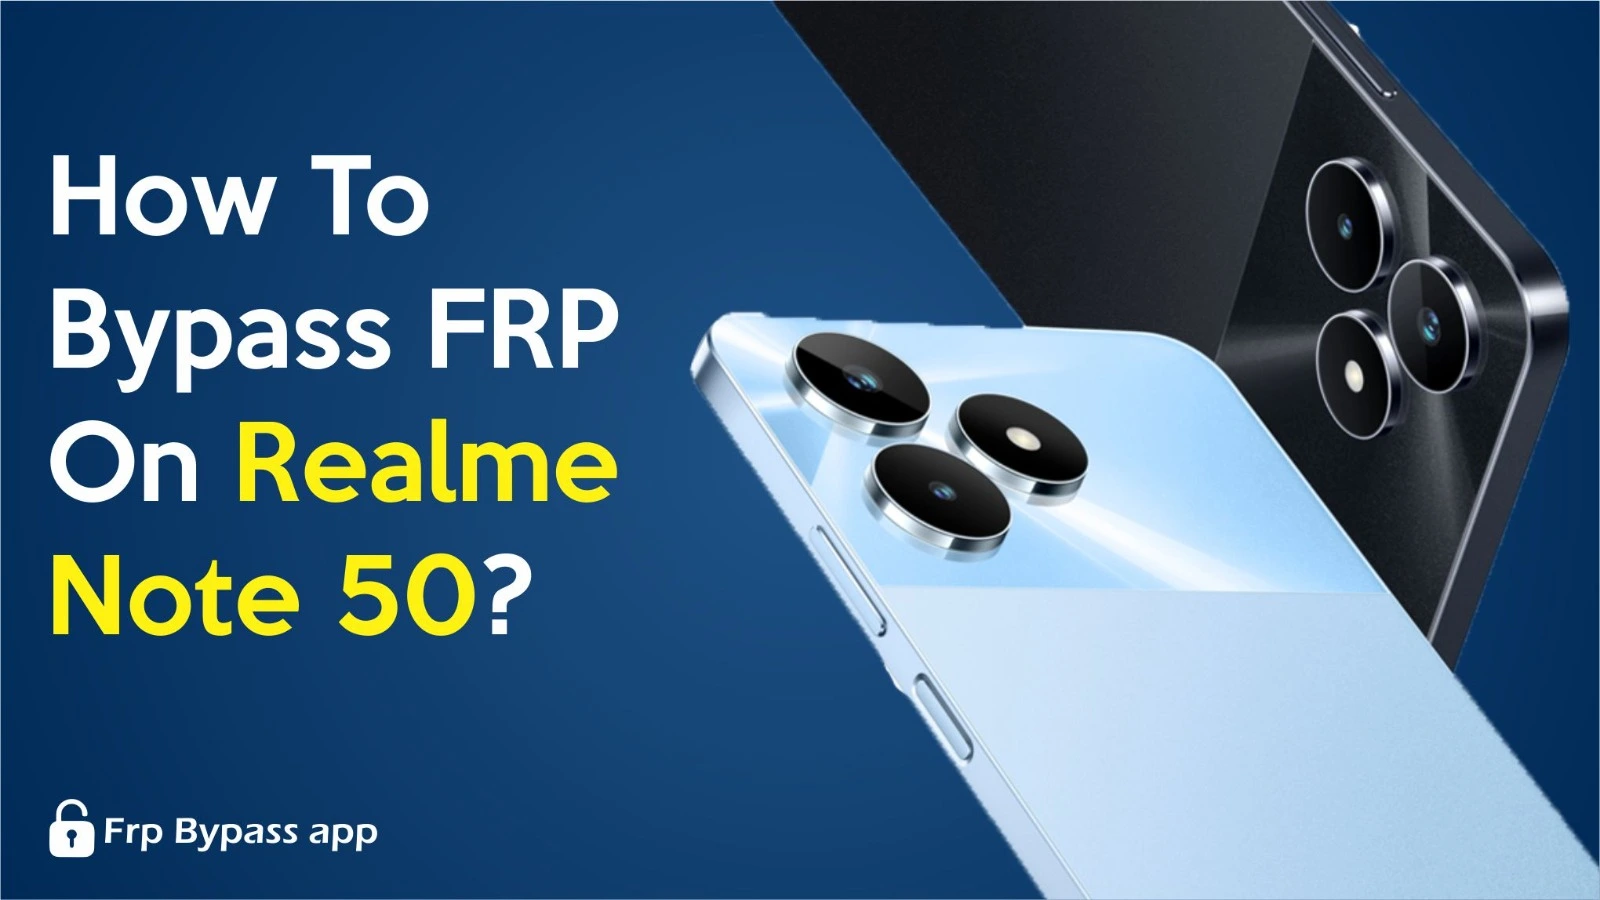 Bypass FRP On Realme Note 50 image